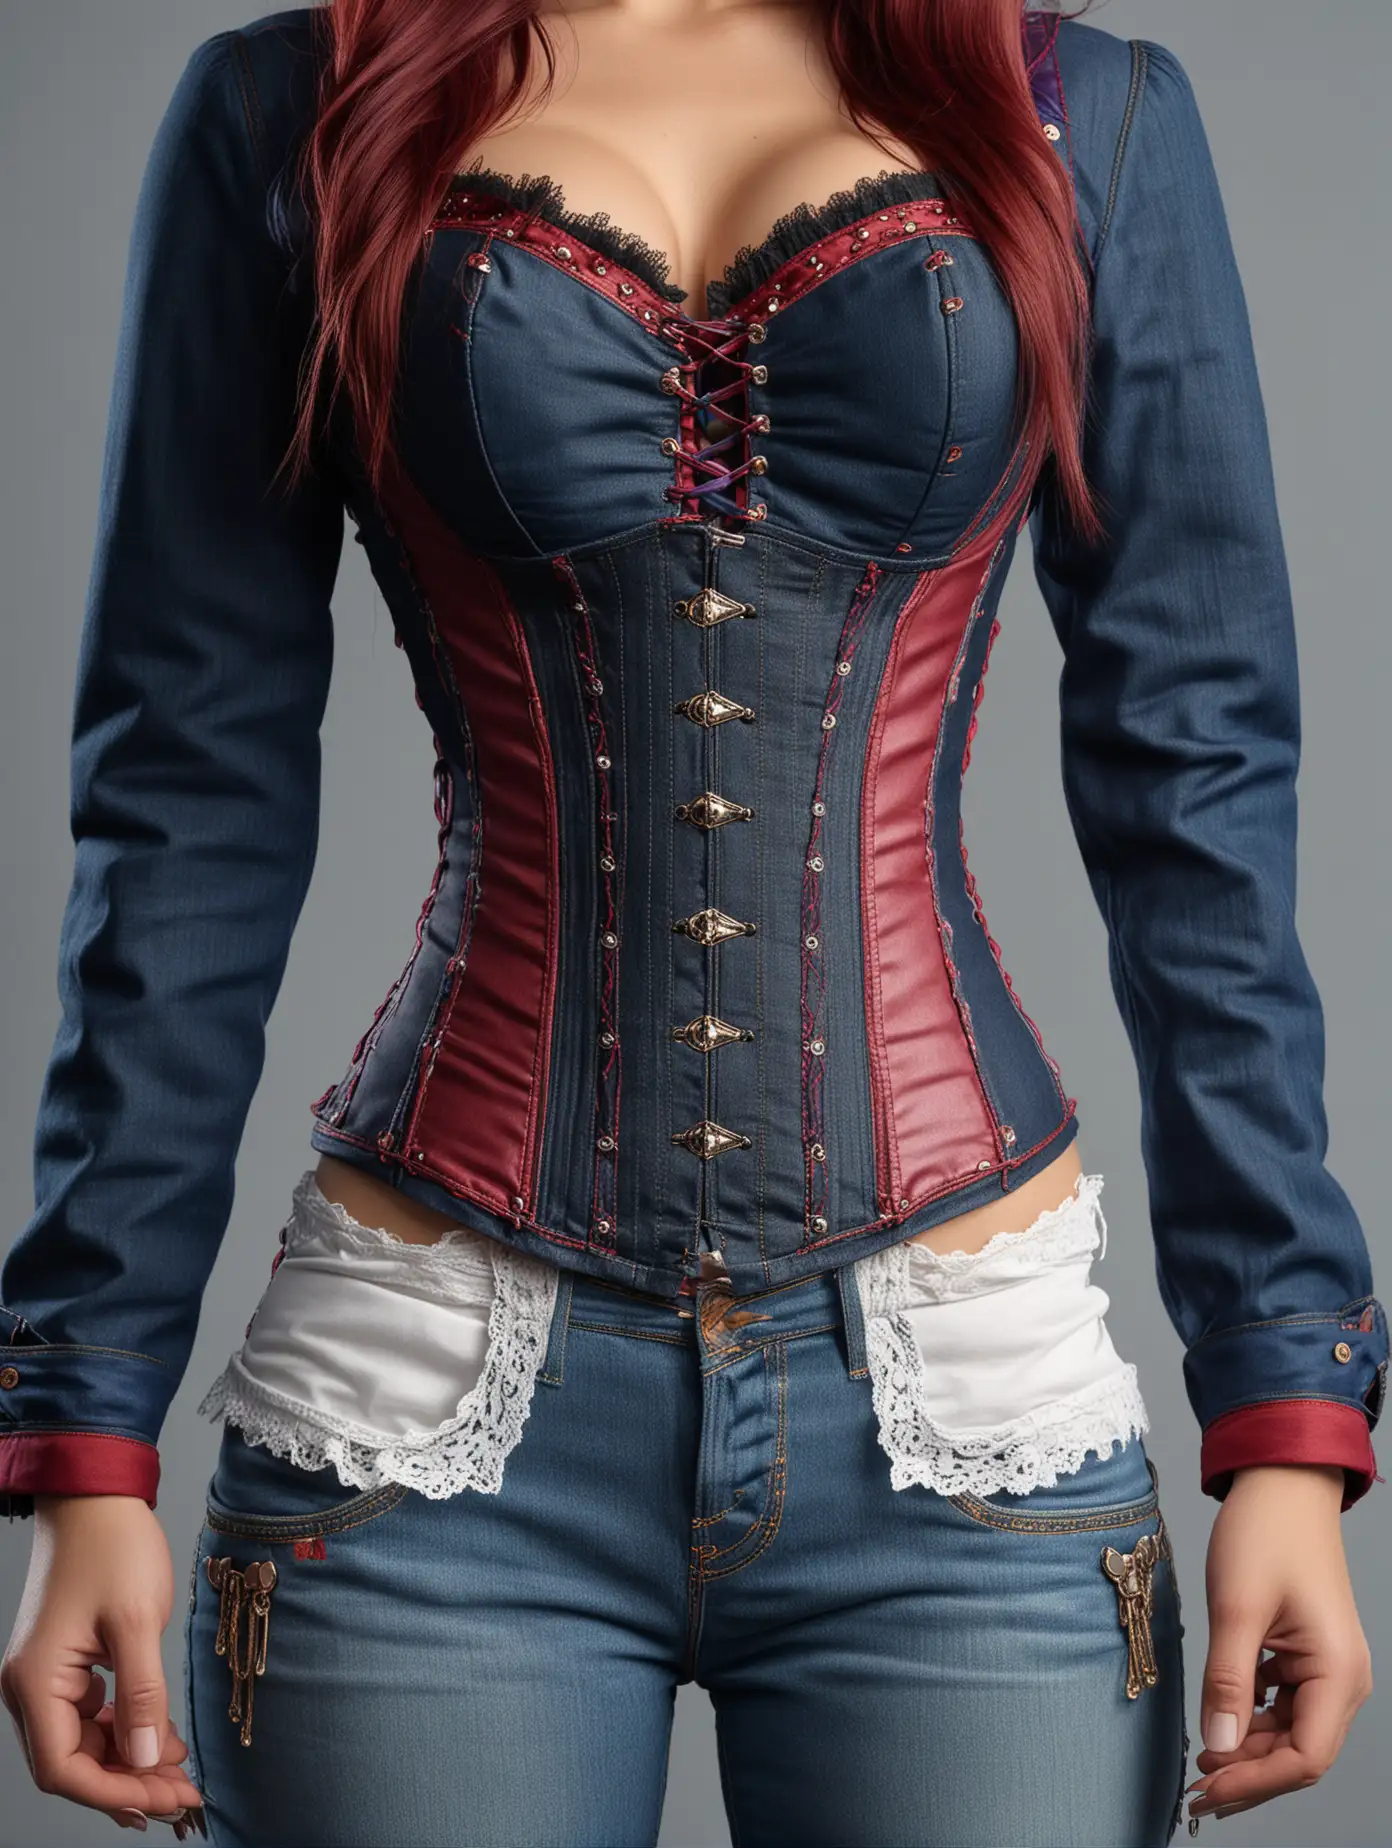 Young-Woman-in-Multicolored-Corset-and-Maroon-Blazer-with-Long-Hair